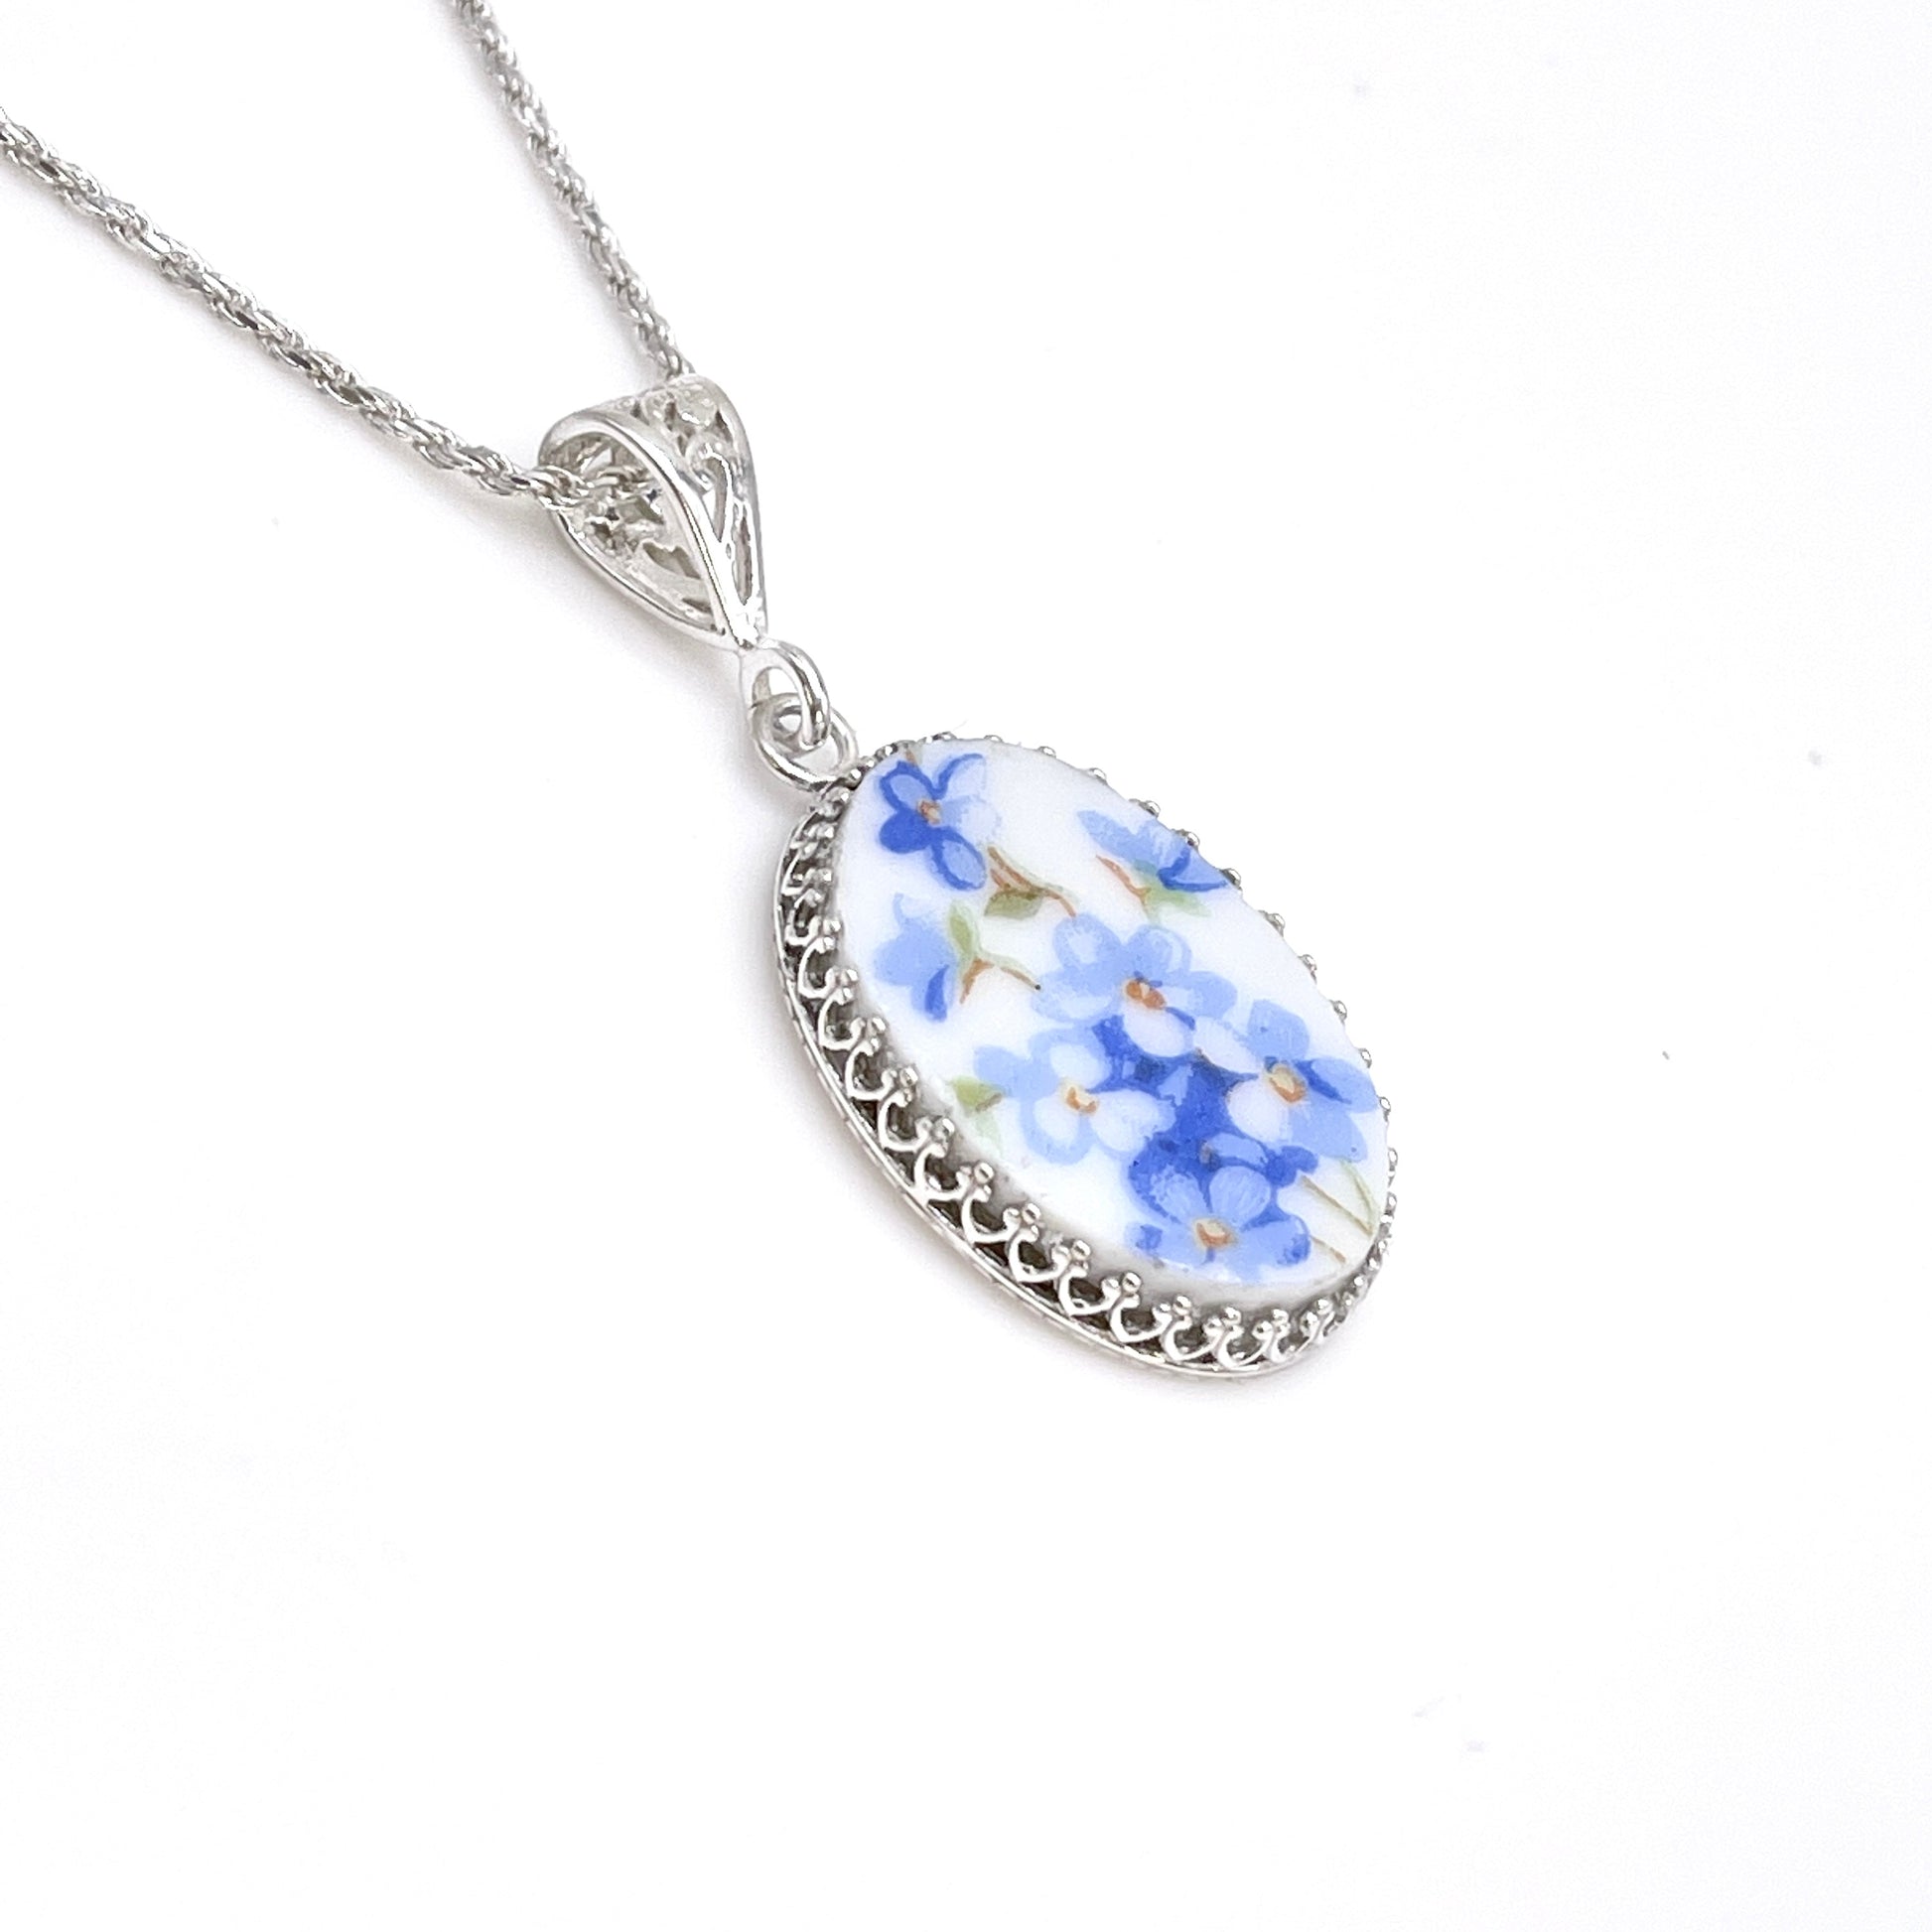 Broken China Jewelry, Forget Me Not Flower Necklace, Vintage Porcelain Necklace, 20th Anniversary Gift for Wife,